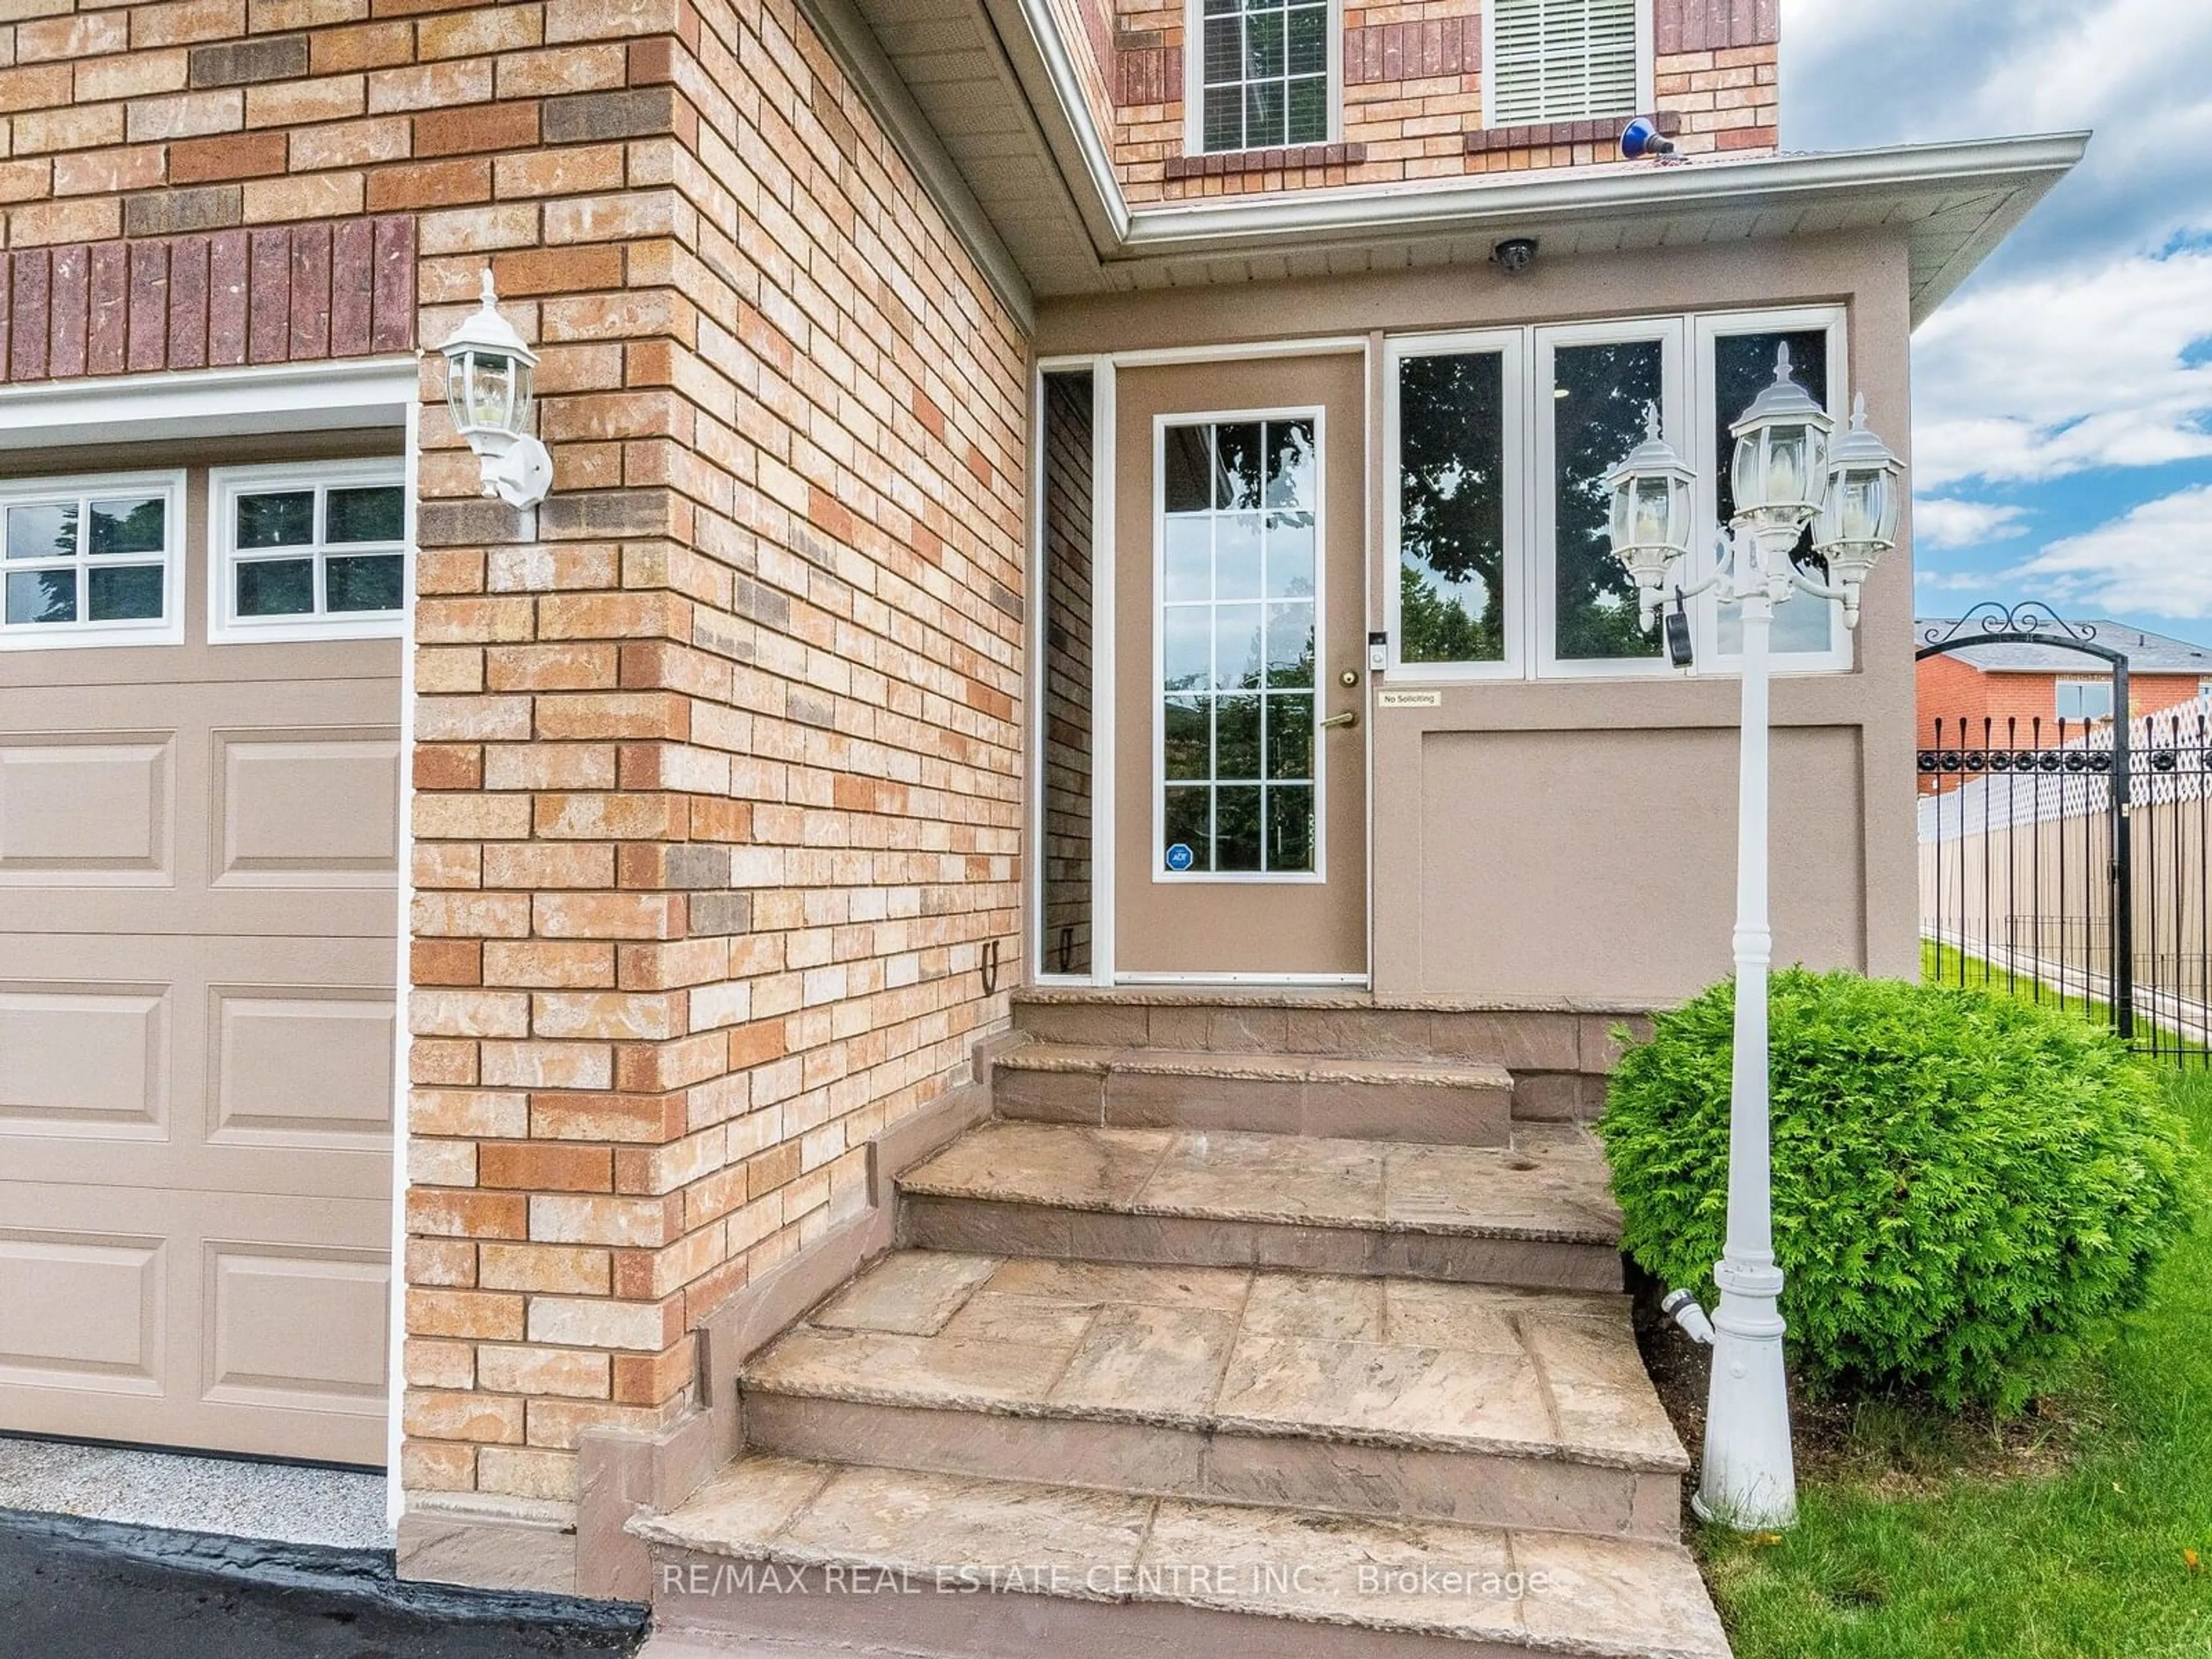 Home with brick exterior material for 5599 Brenchley Ave, Mississauga Ontario L5V 2H3